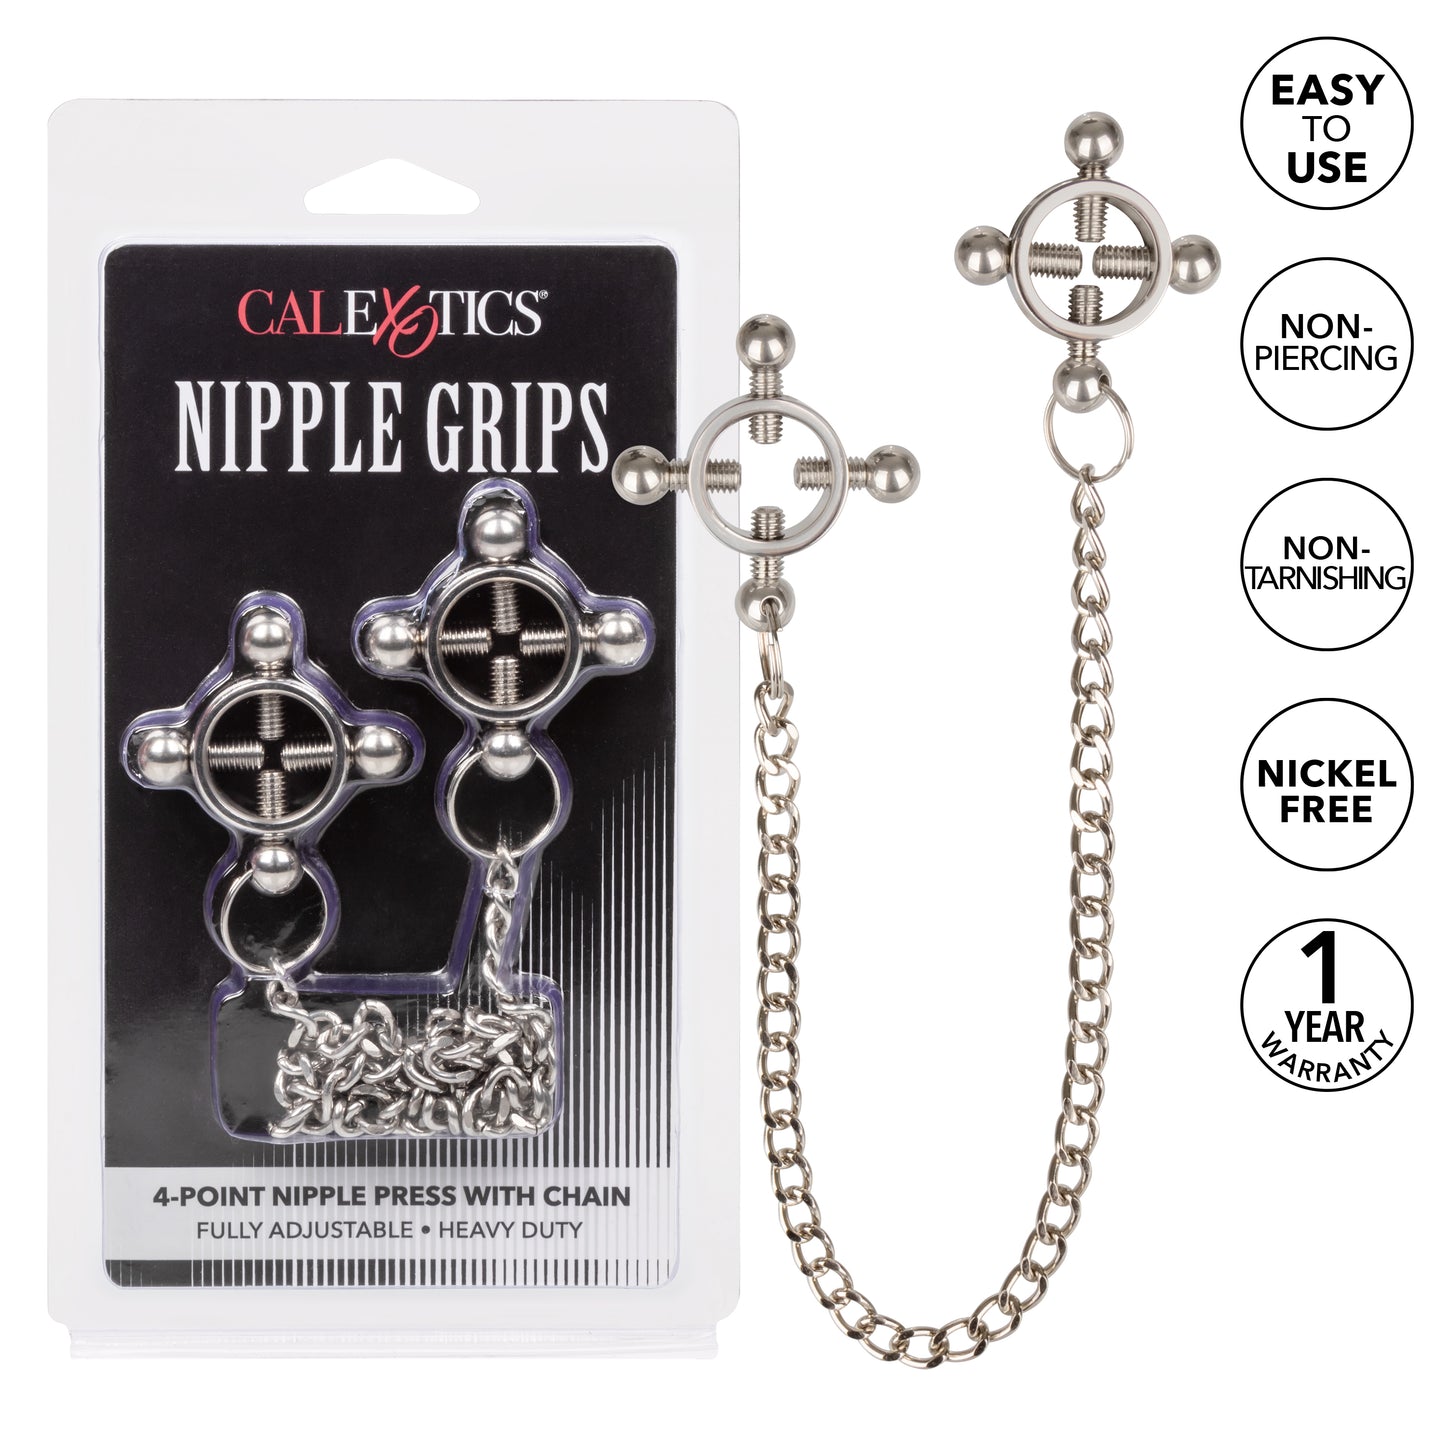 Nipple Grips 4-Point Nipple Press with Chain